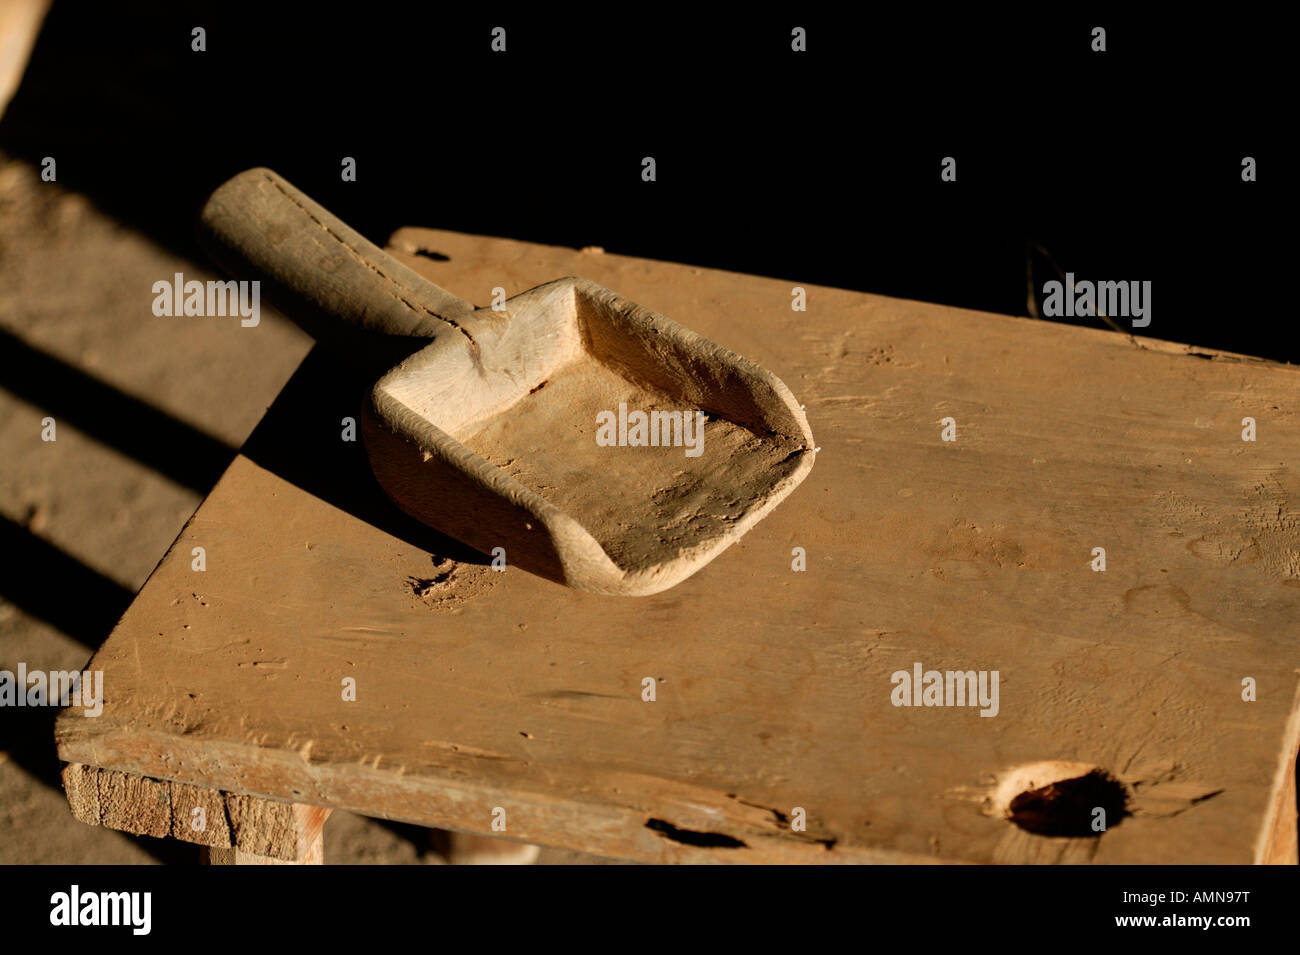 An old hand-made, wooden hand trowel used for scooping grain lying on a wooden table Stock Photo